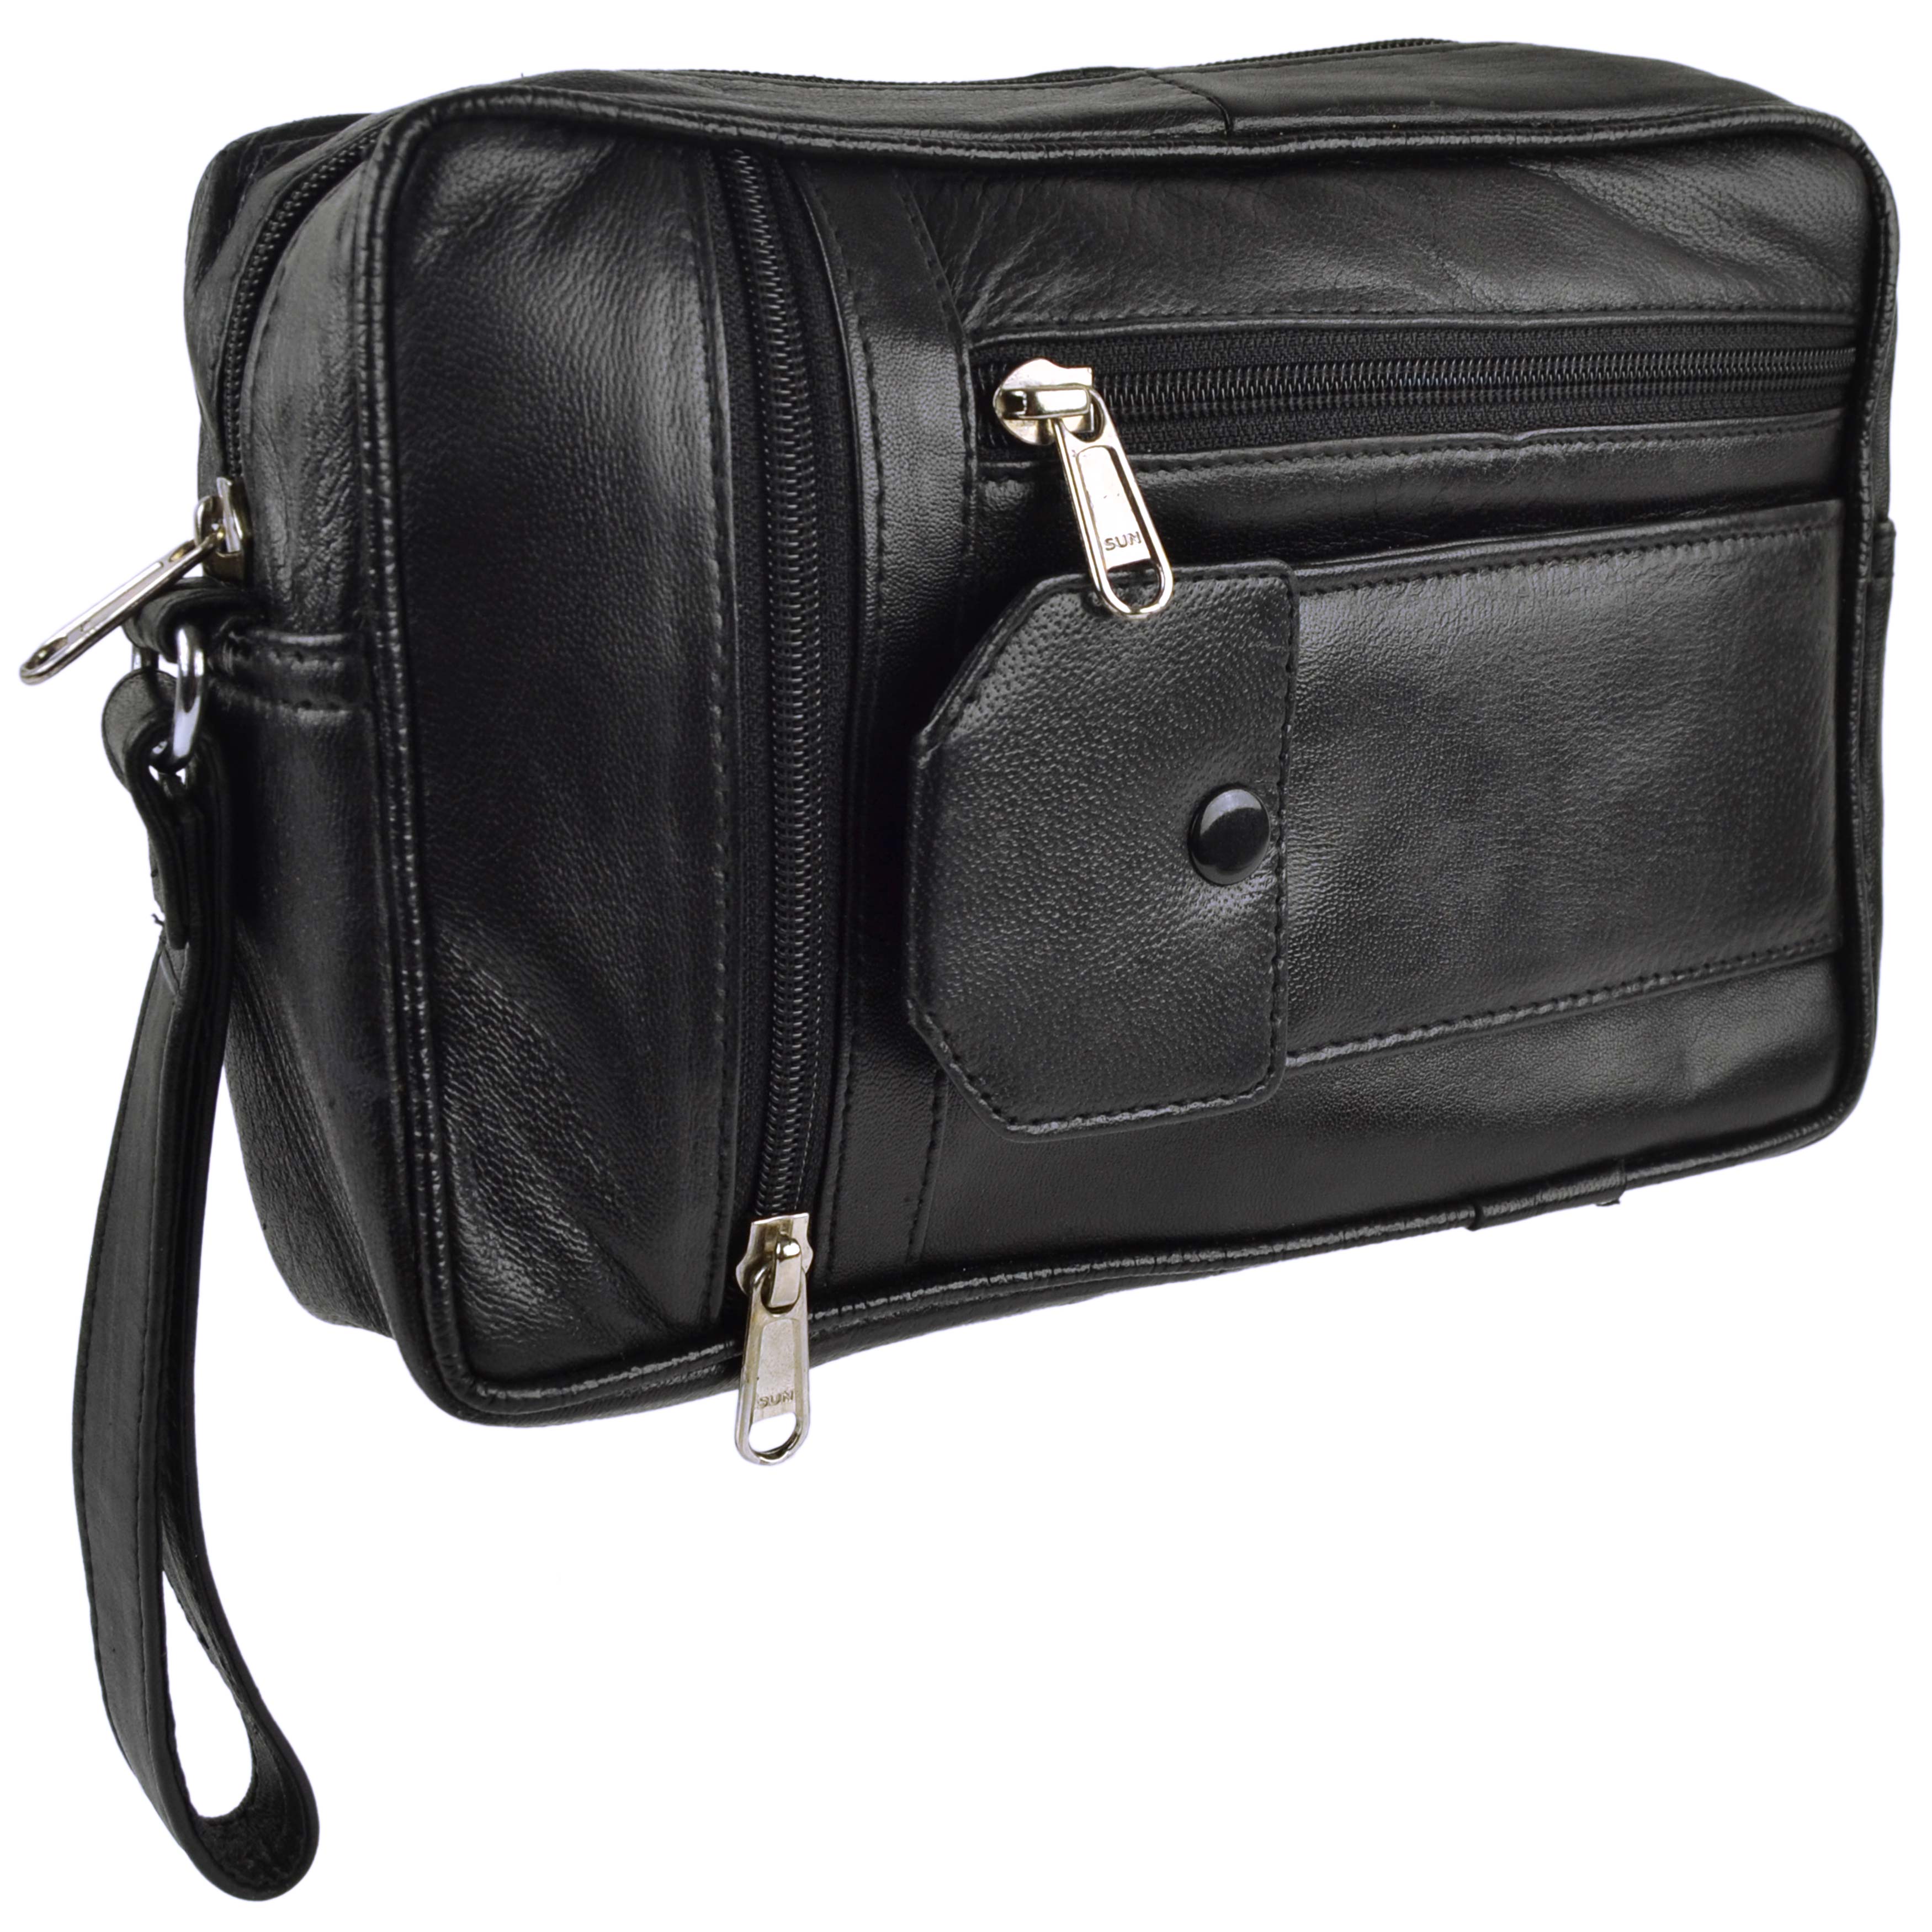 Gents Black Leather Handy Wrist Travel Pouch Manbag by Prime Hide ...